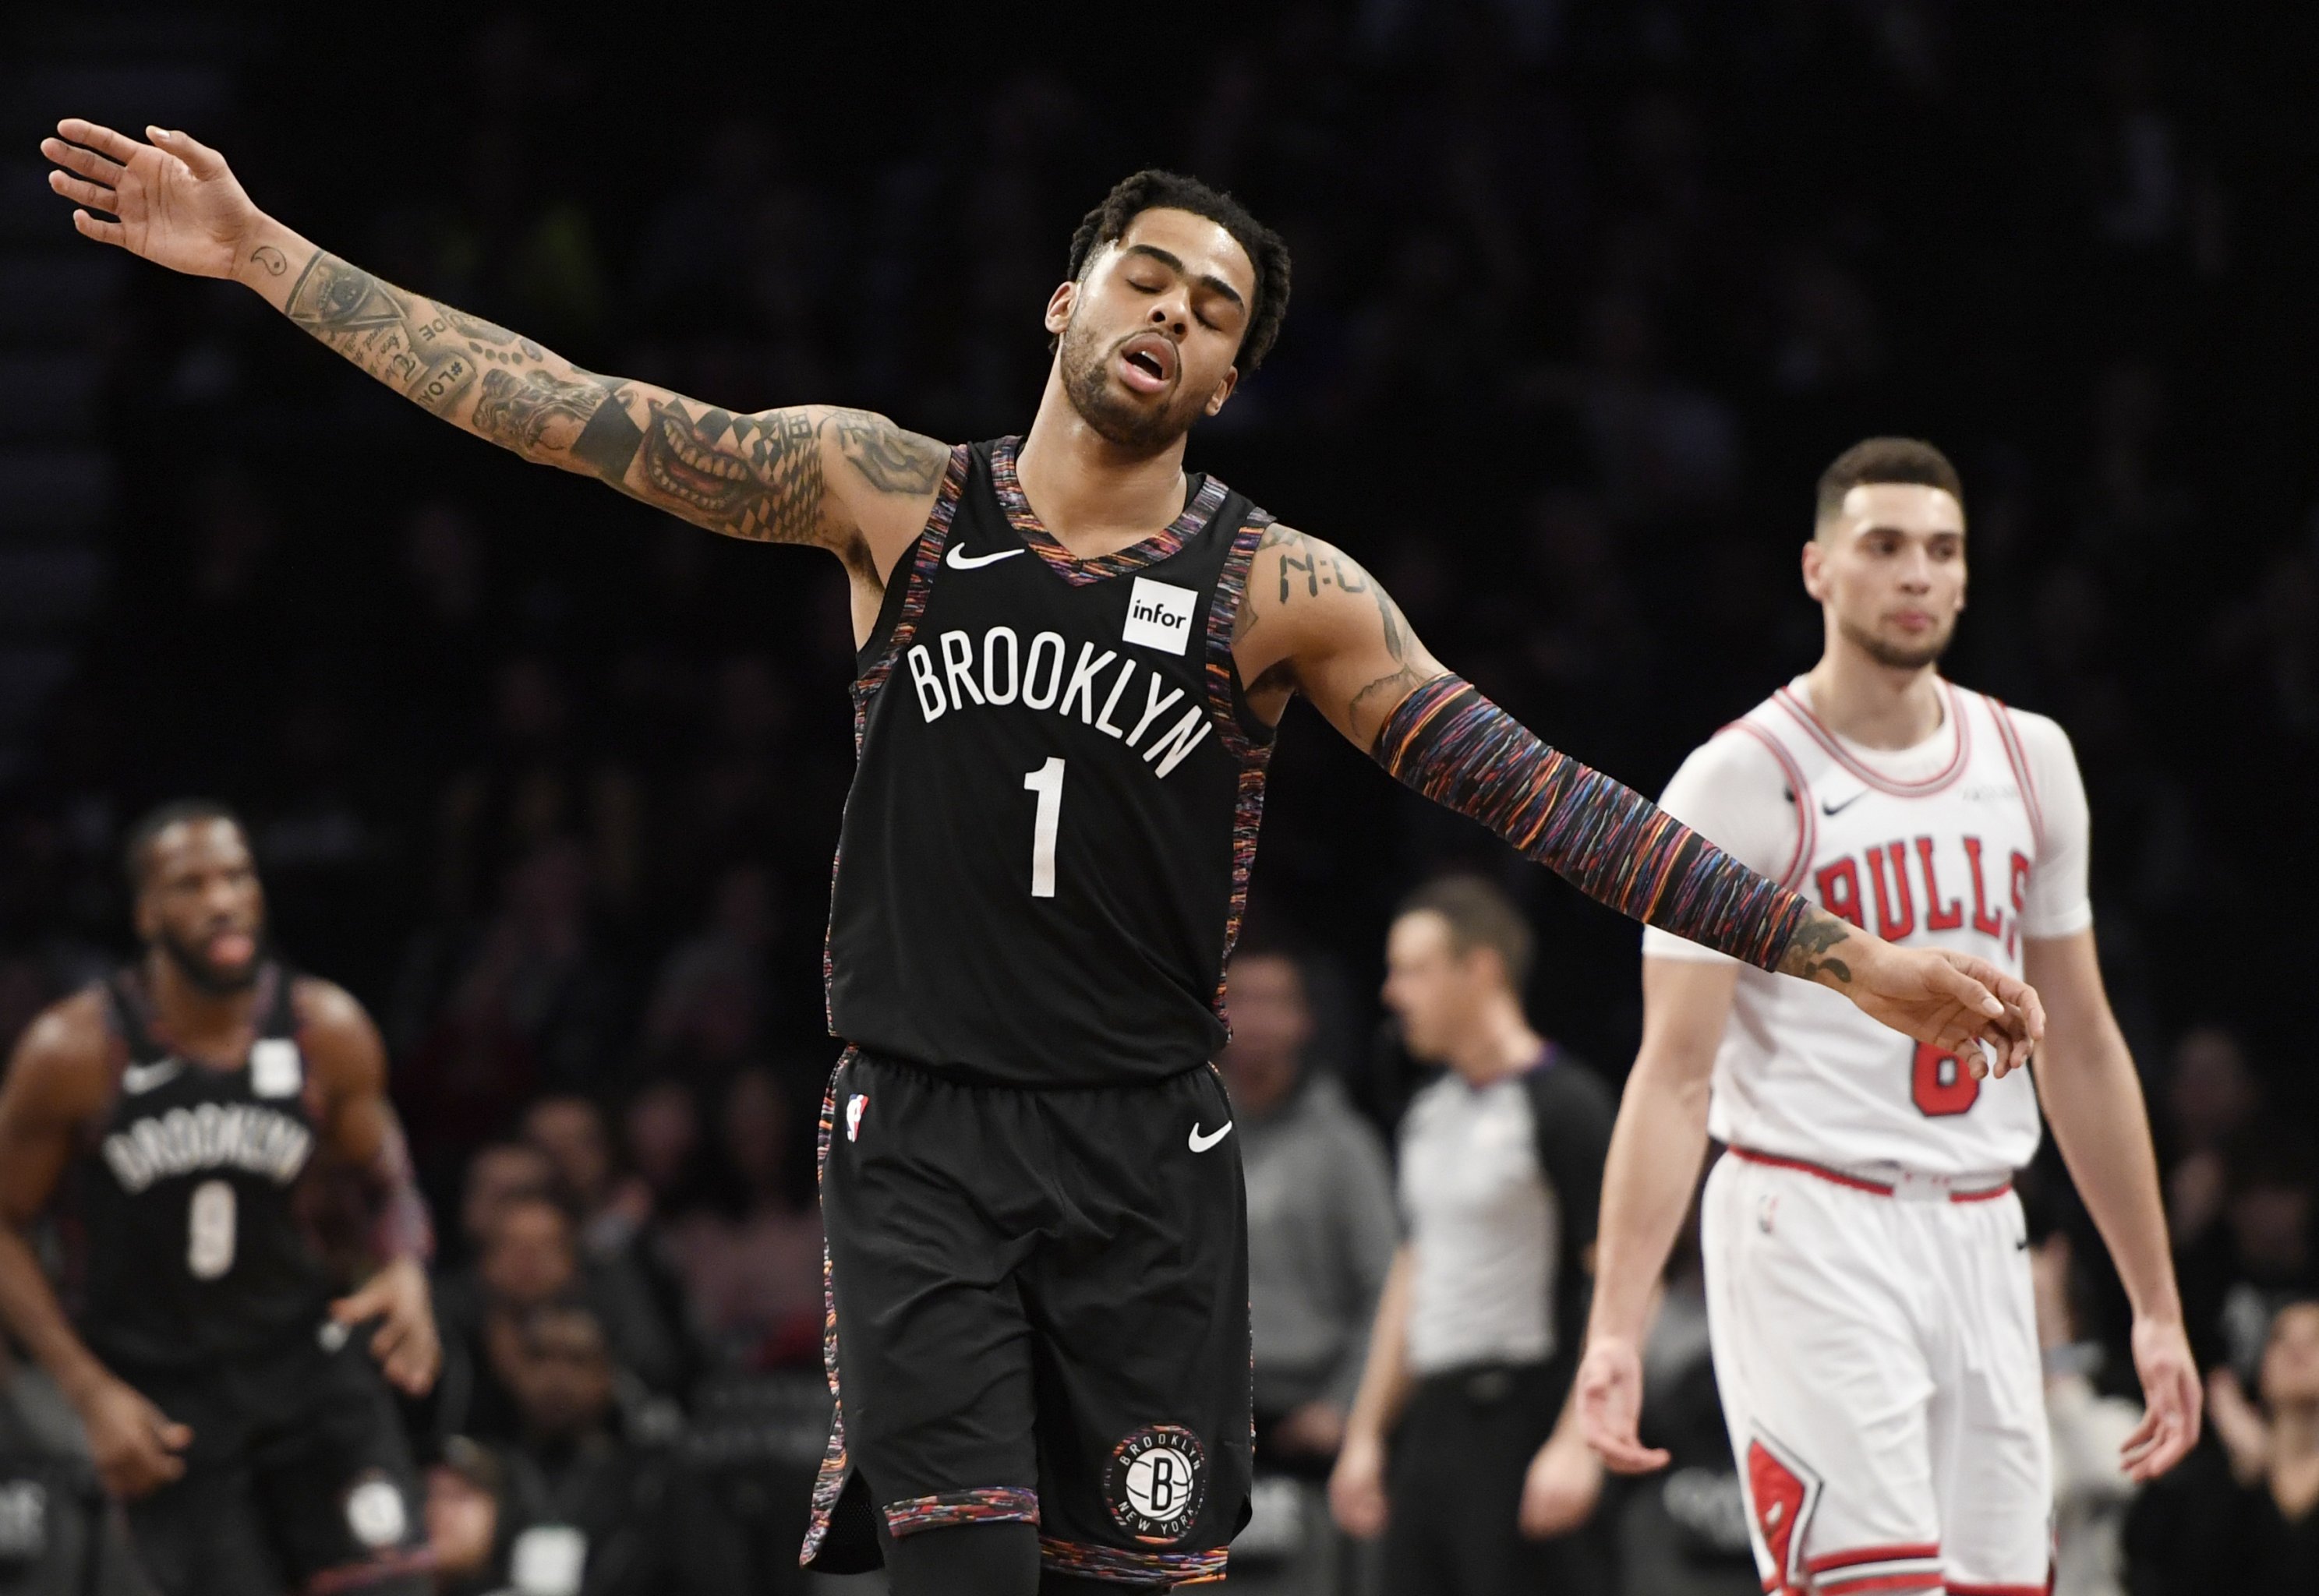 D'Angelo Russell was becoming a Lakers afterthought. Now the Nets